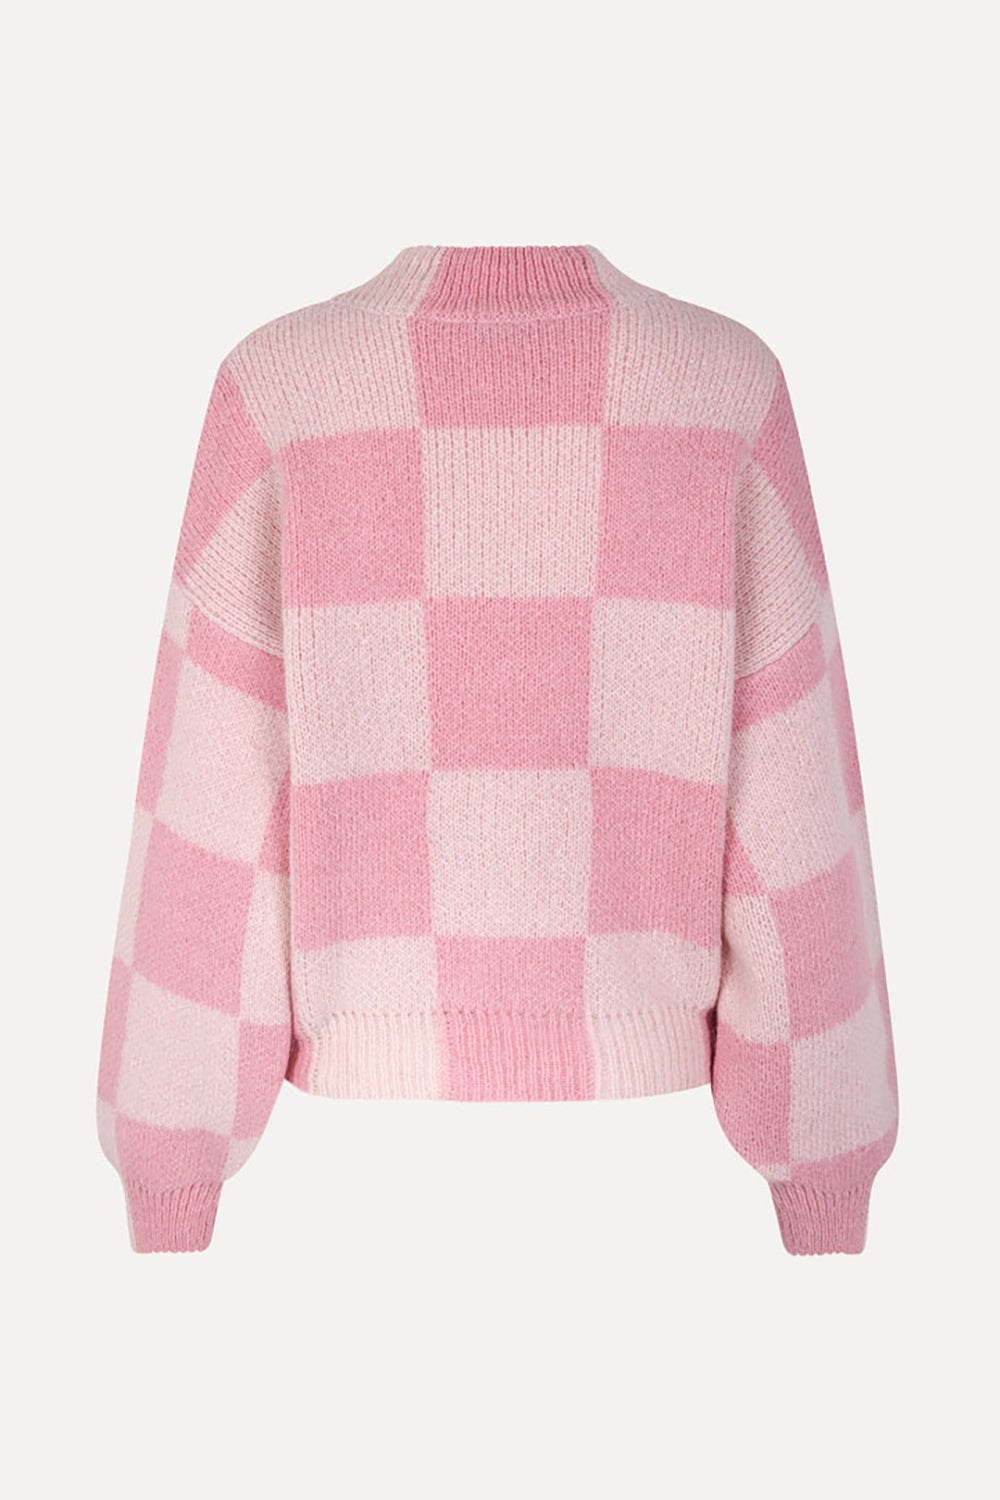 Adonis Knit Orchid Check